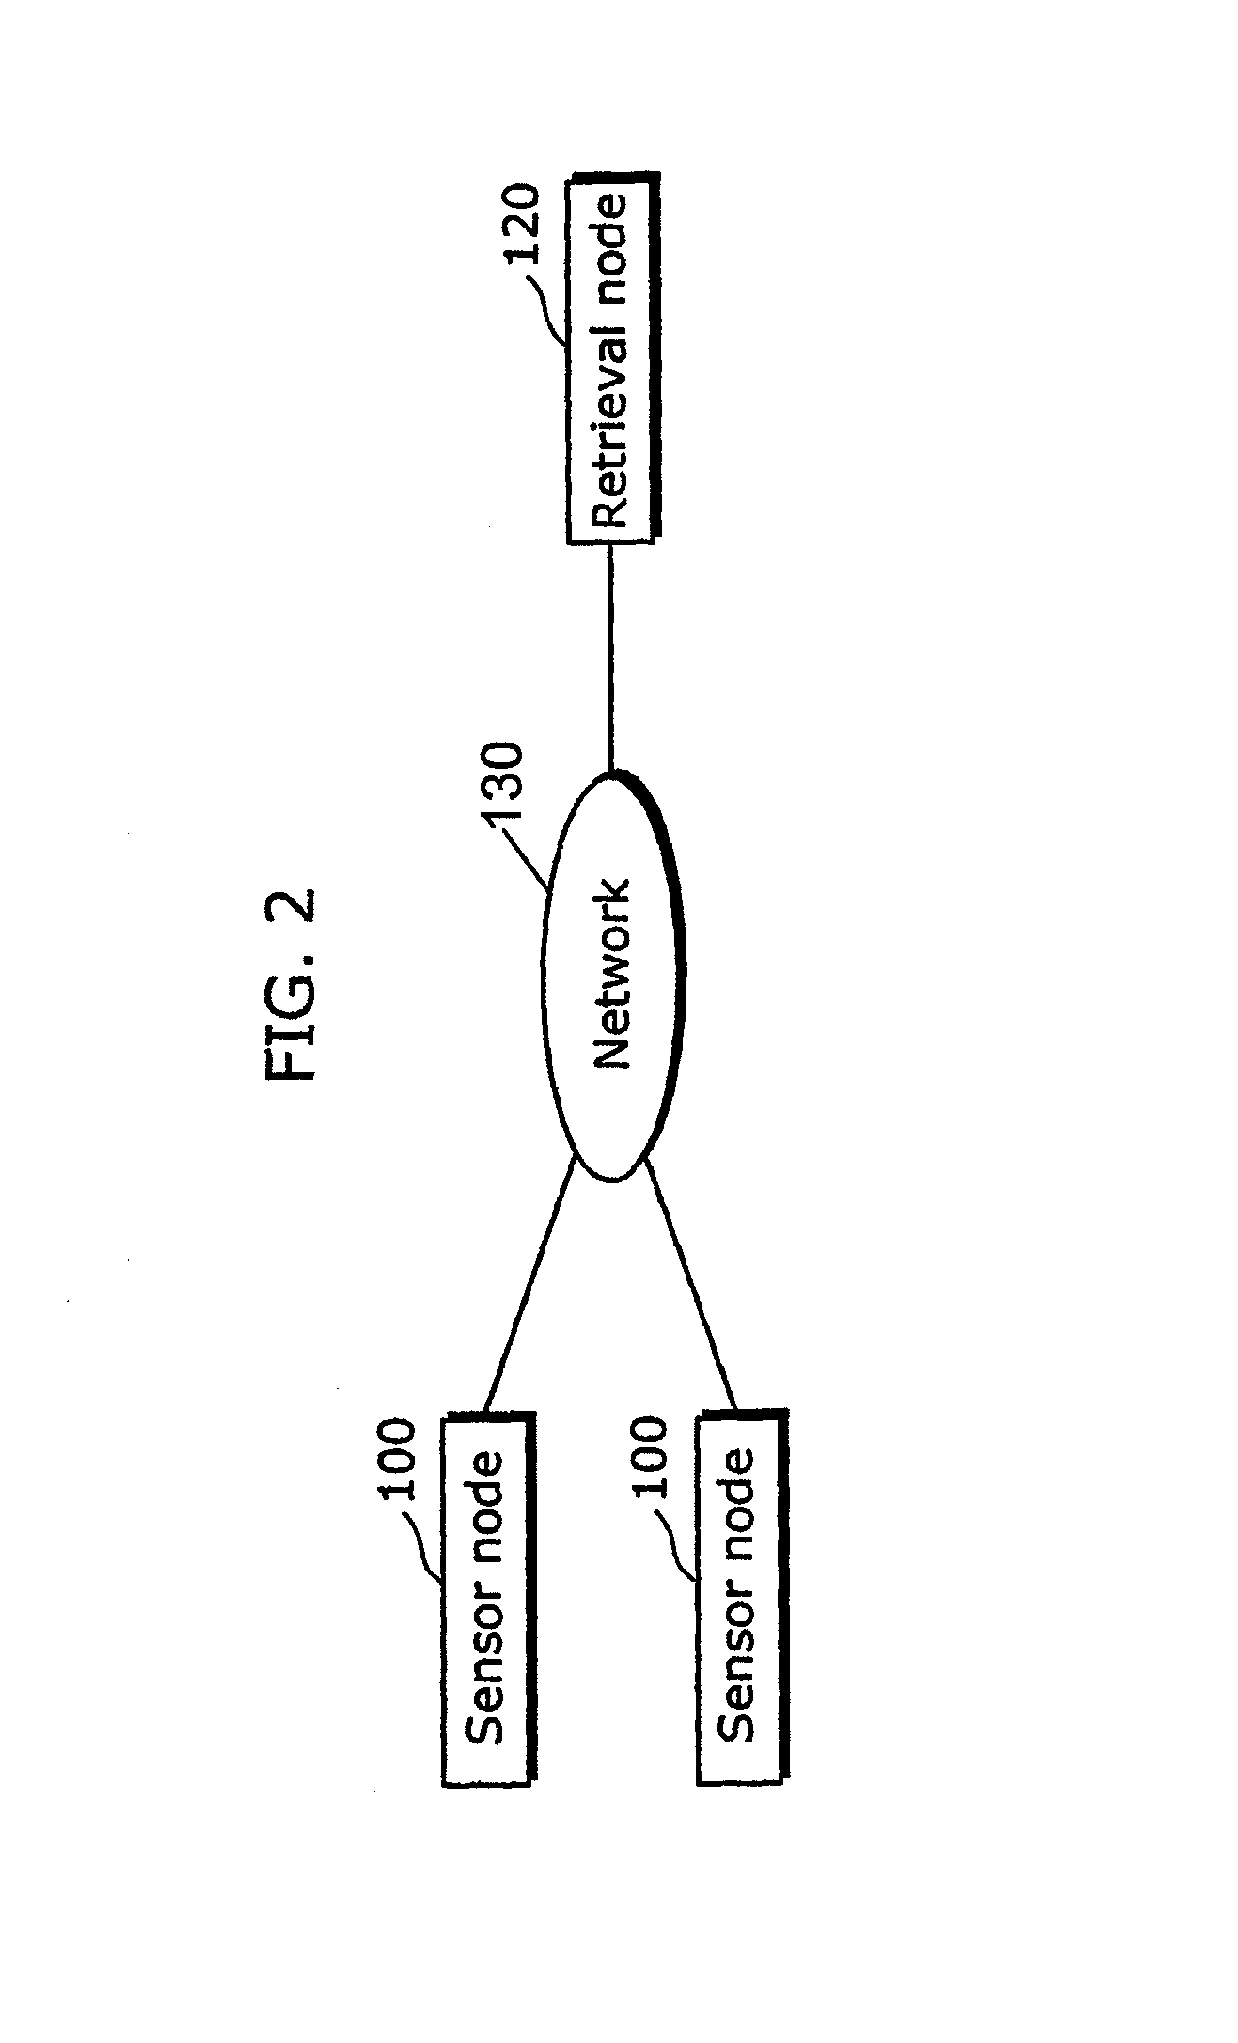 Sensor device which measures surrounding conditions and obtains a newly measured value, retrieval device which utilizes a network to search sensor devices, and relay device which relays a communication between the sensor device and the retrieval device